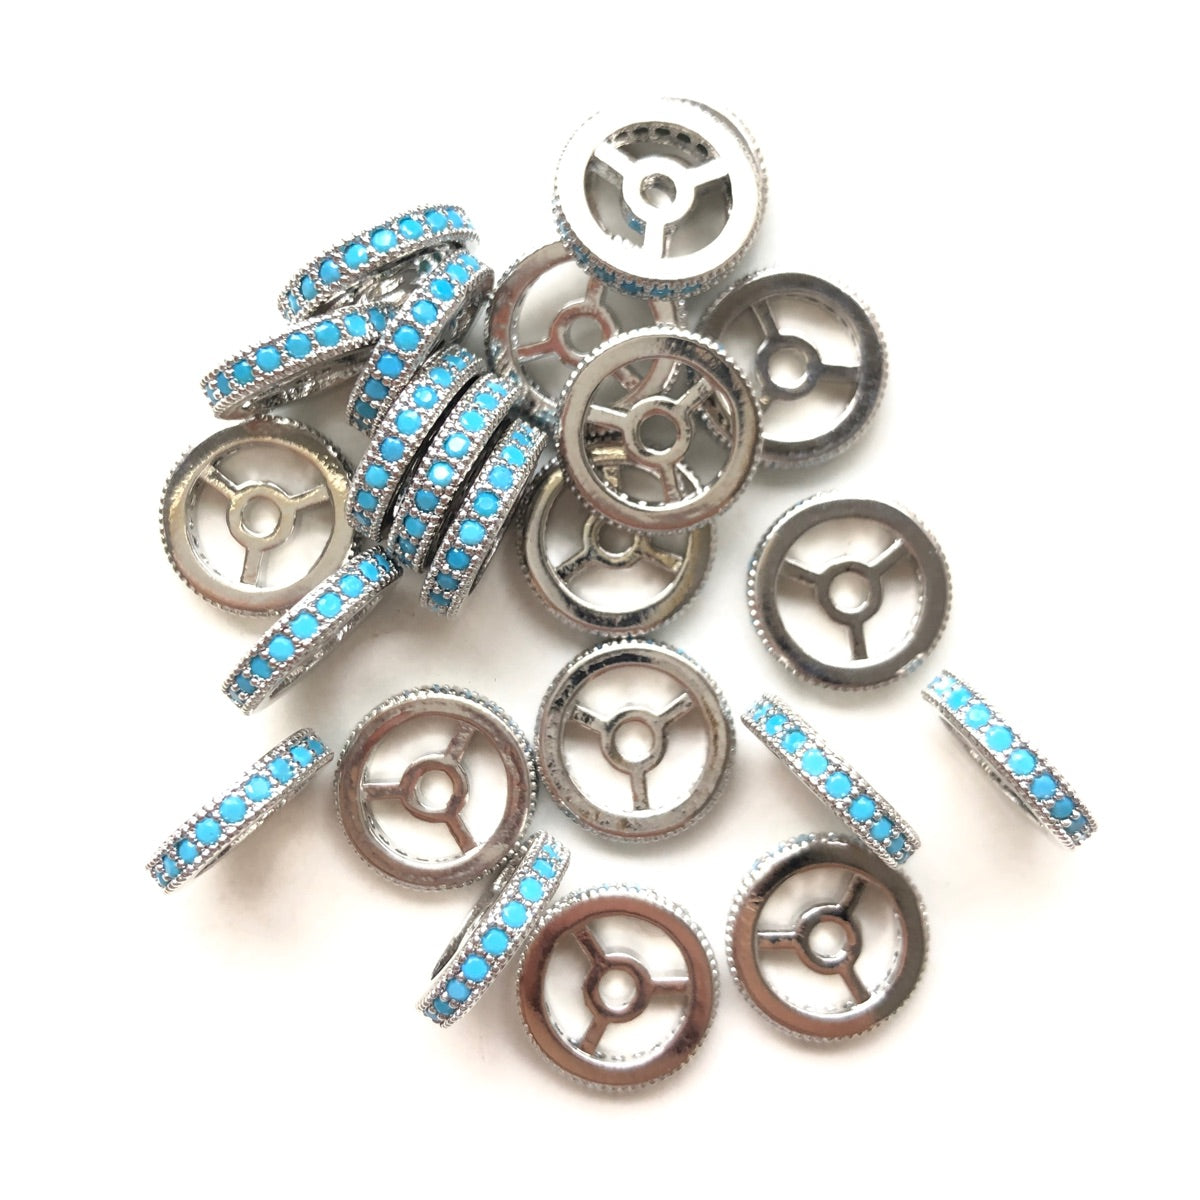 20pcs/lot 9.6/12mm Turquoise CZ Paved Wheel Rondelle Spacers Silver CZ Paved Spacers New Spacers Arrivals Rondelle Beads Charms Beads Beyond